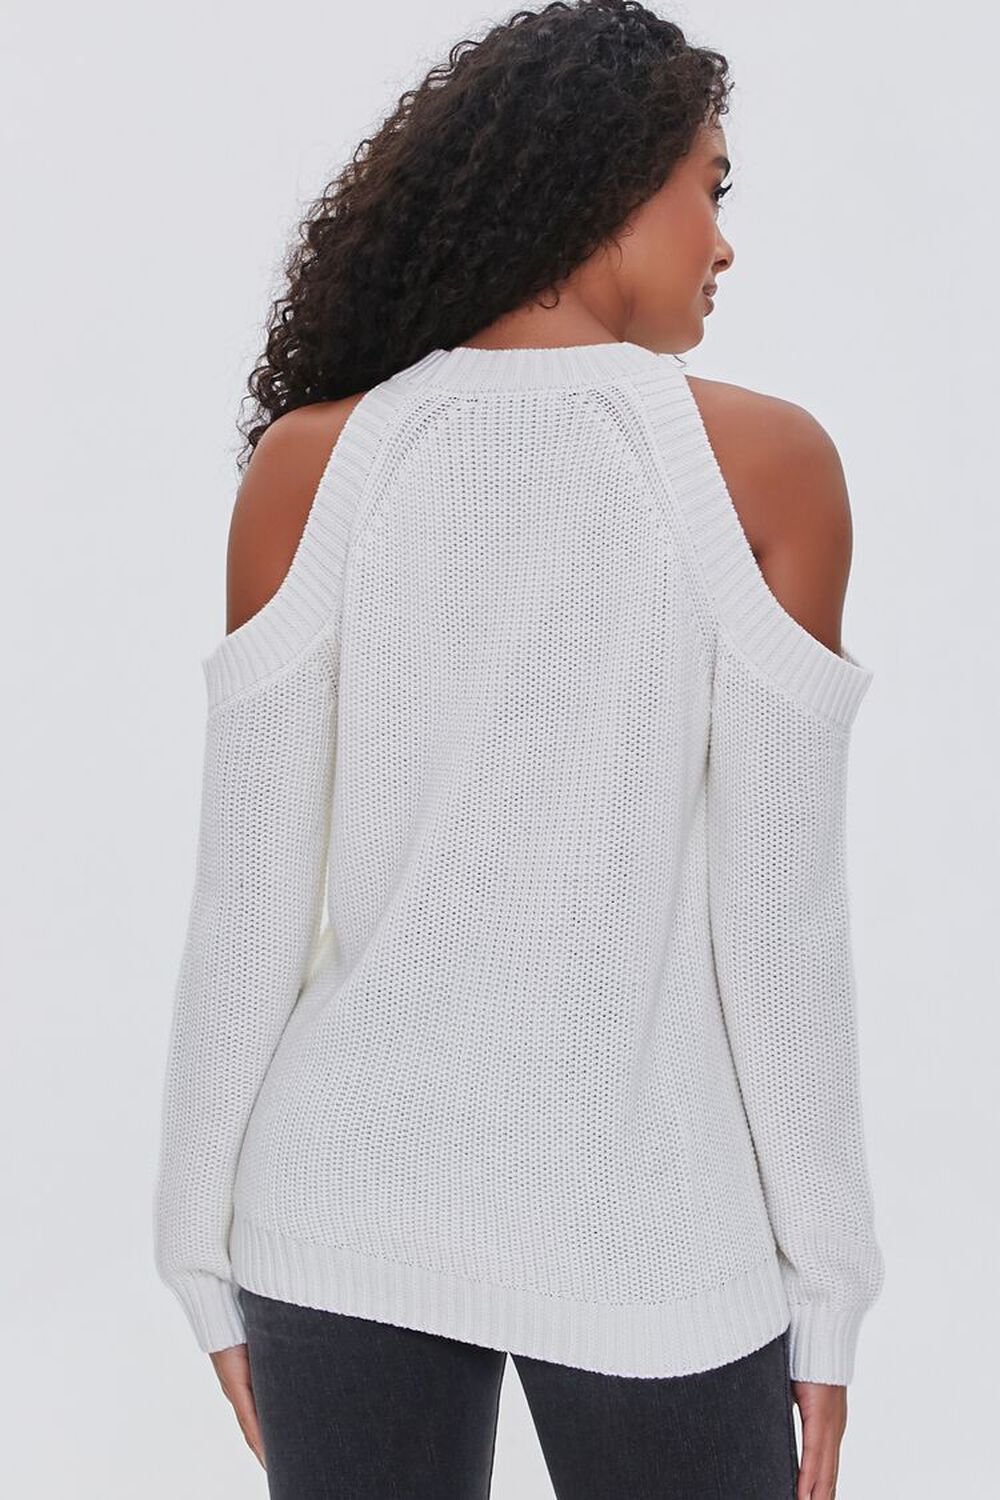 CREAM Ribbed Open-Shoulder Sweater, image 3